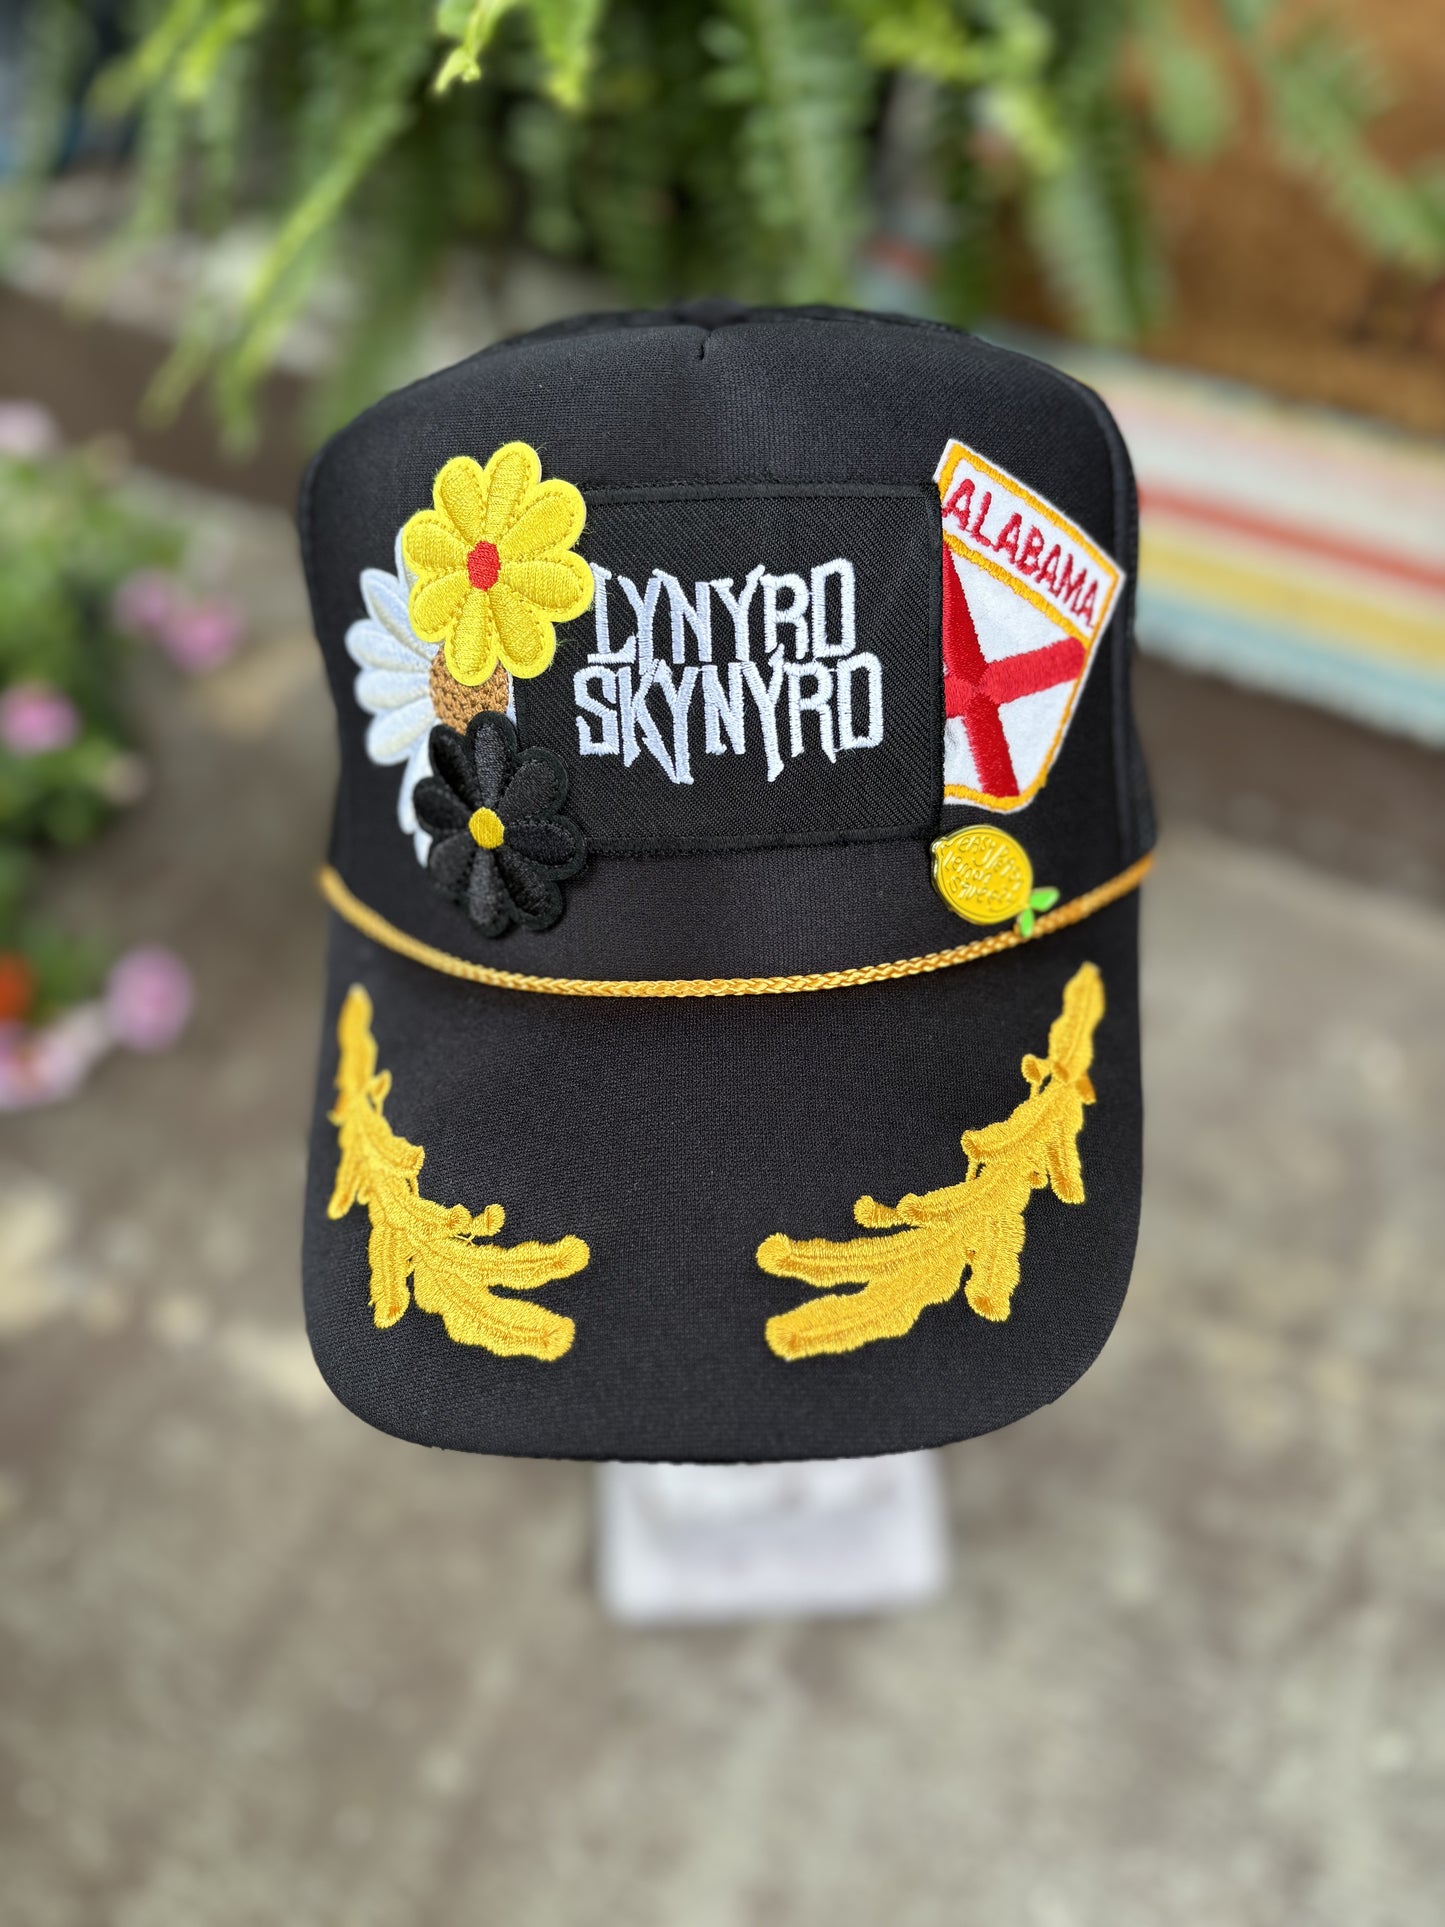 Cutomized Otto “Sweet Home Alabama” Trucker Hat with Vintage Lynyrd Skynyrd and Alabama Patches, Flower Patches and Enamel Pin